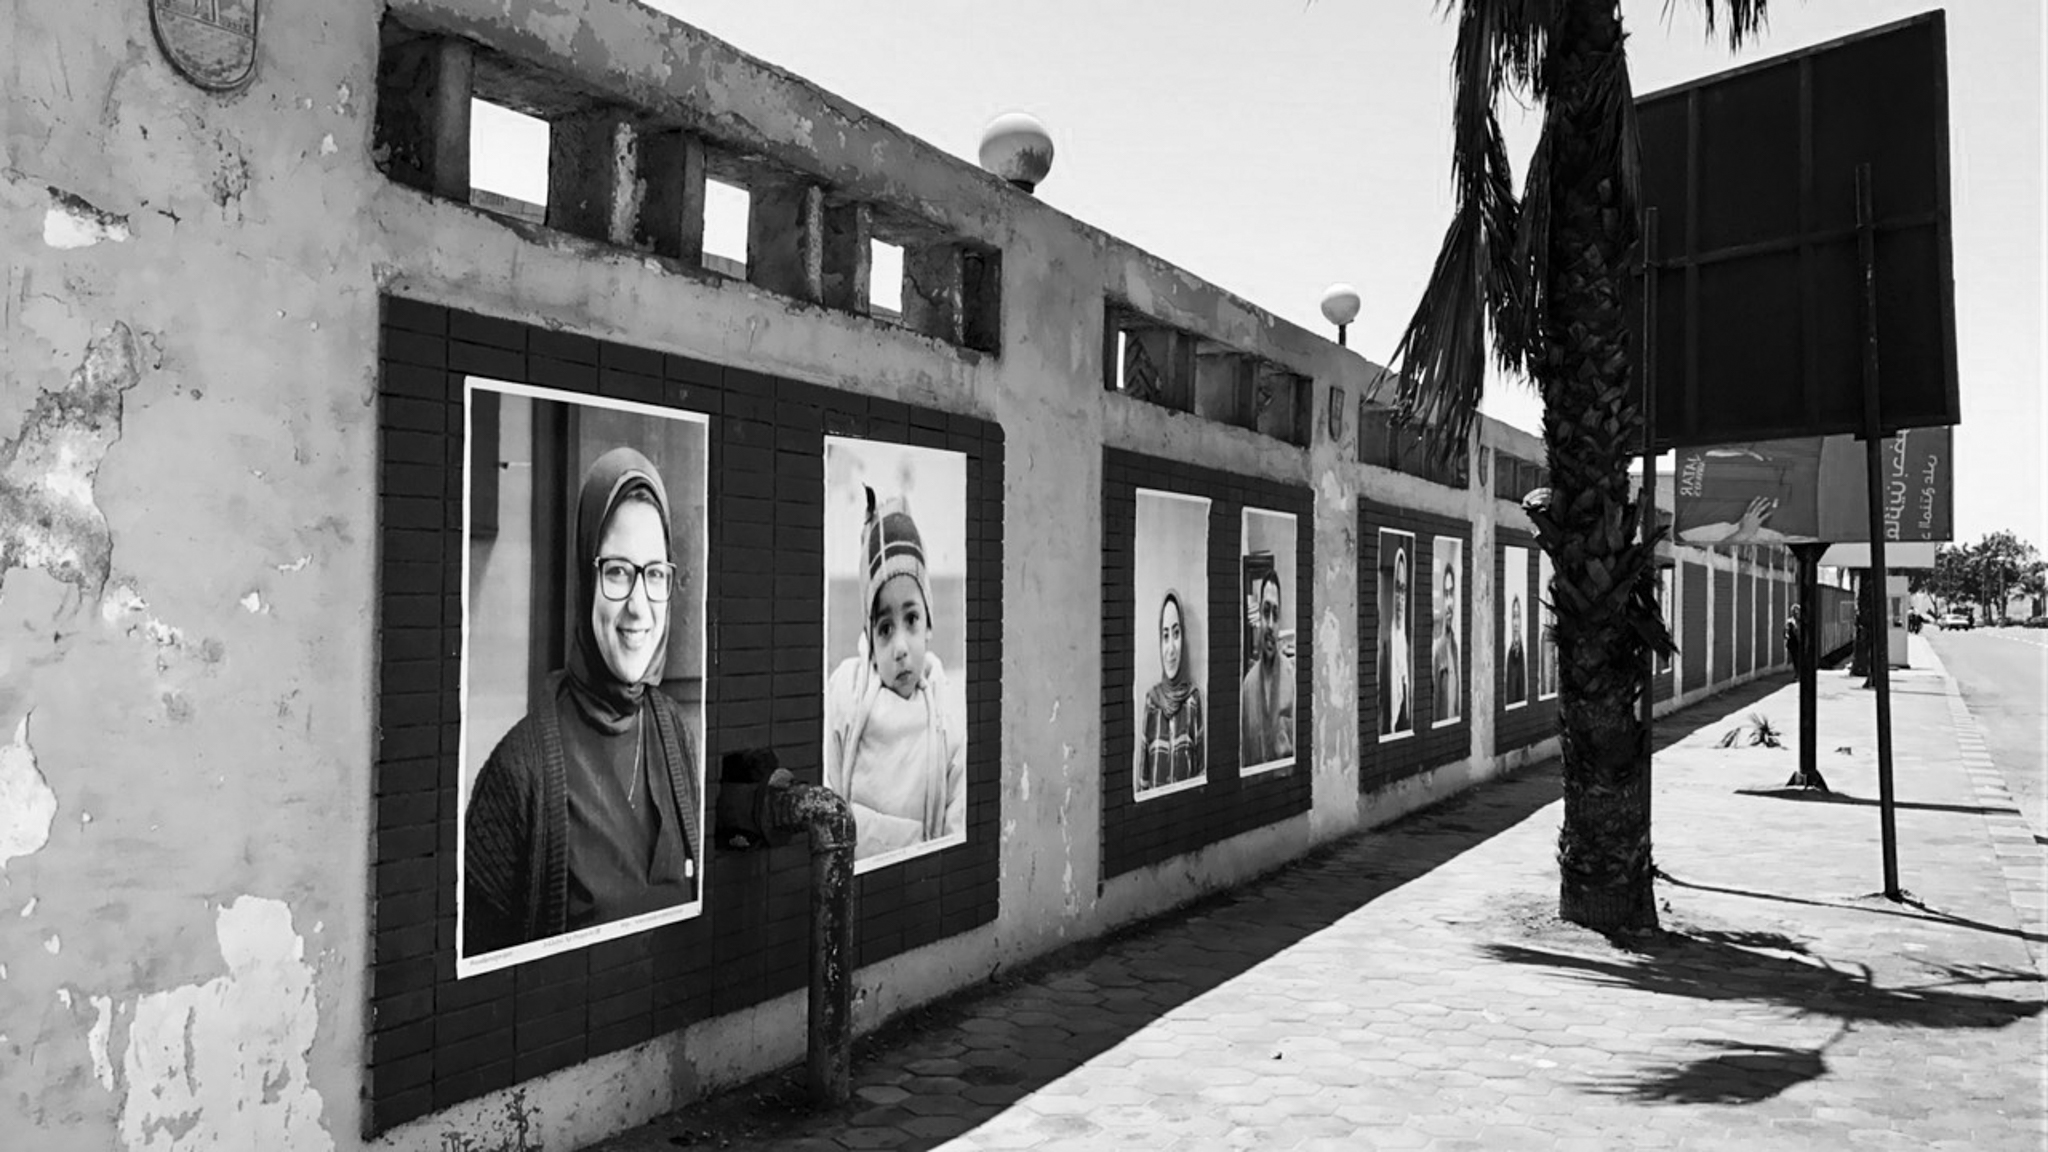  Each portrait carrying a timeline behind it and reflecting the community of the Hospital... 